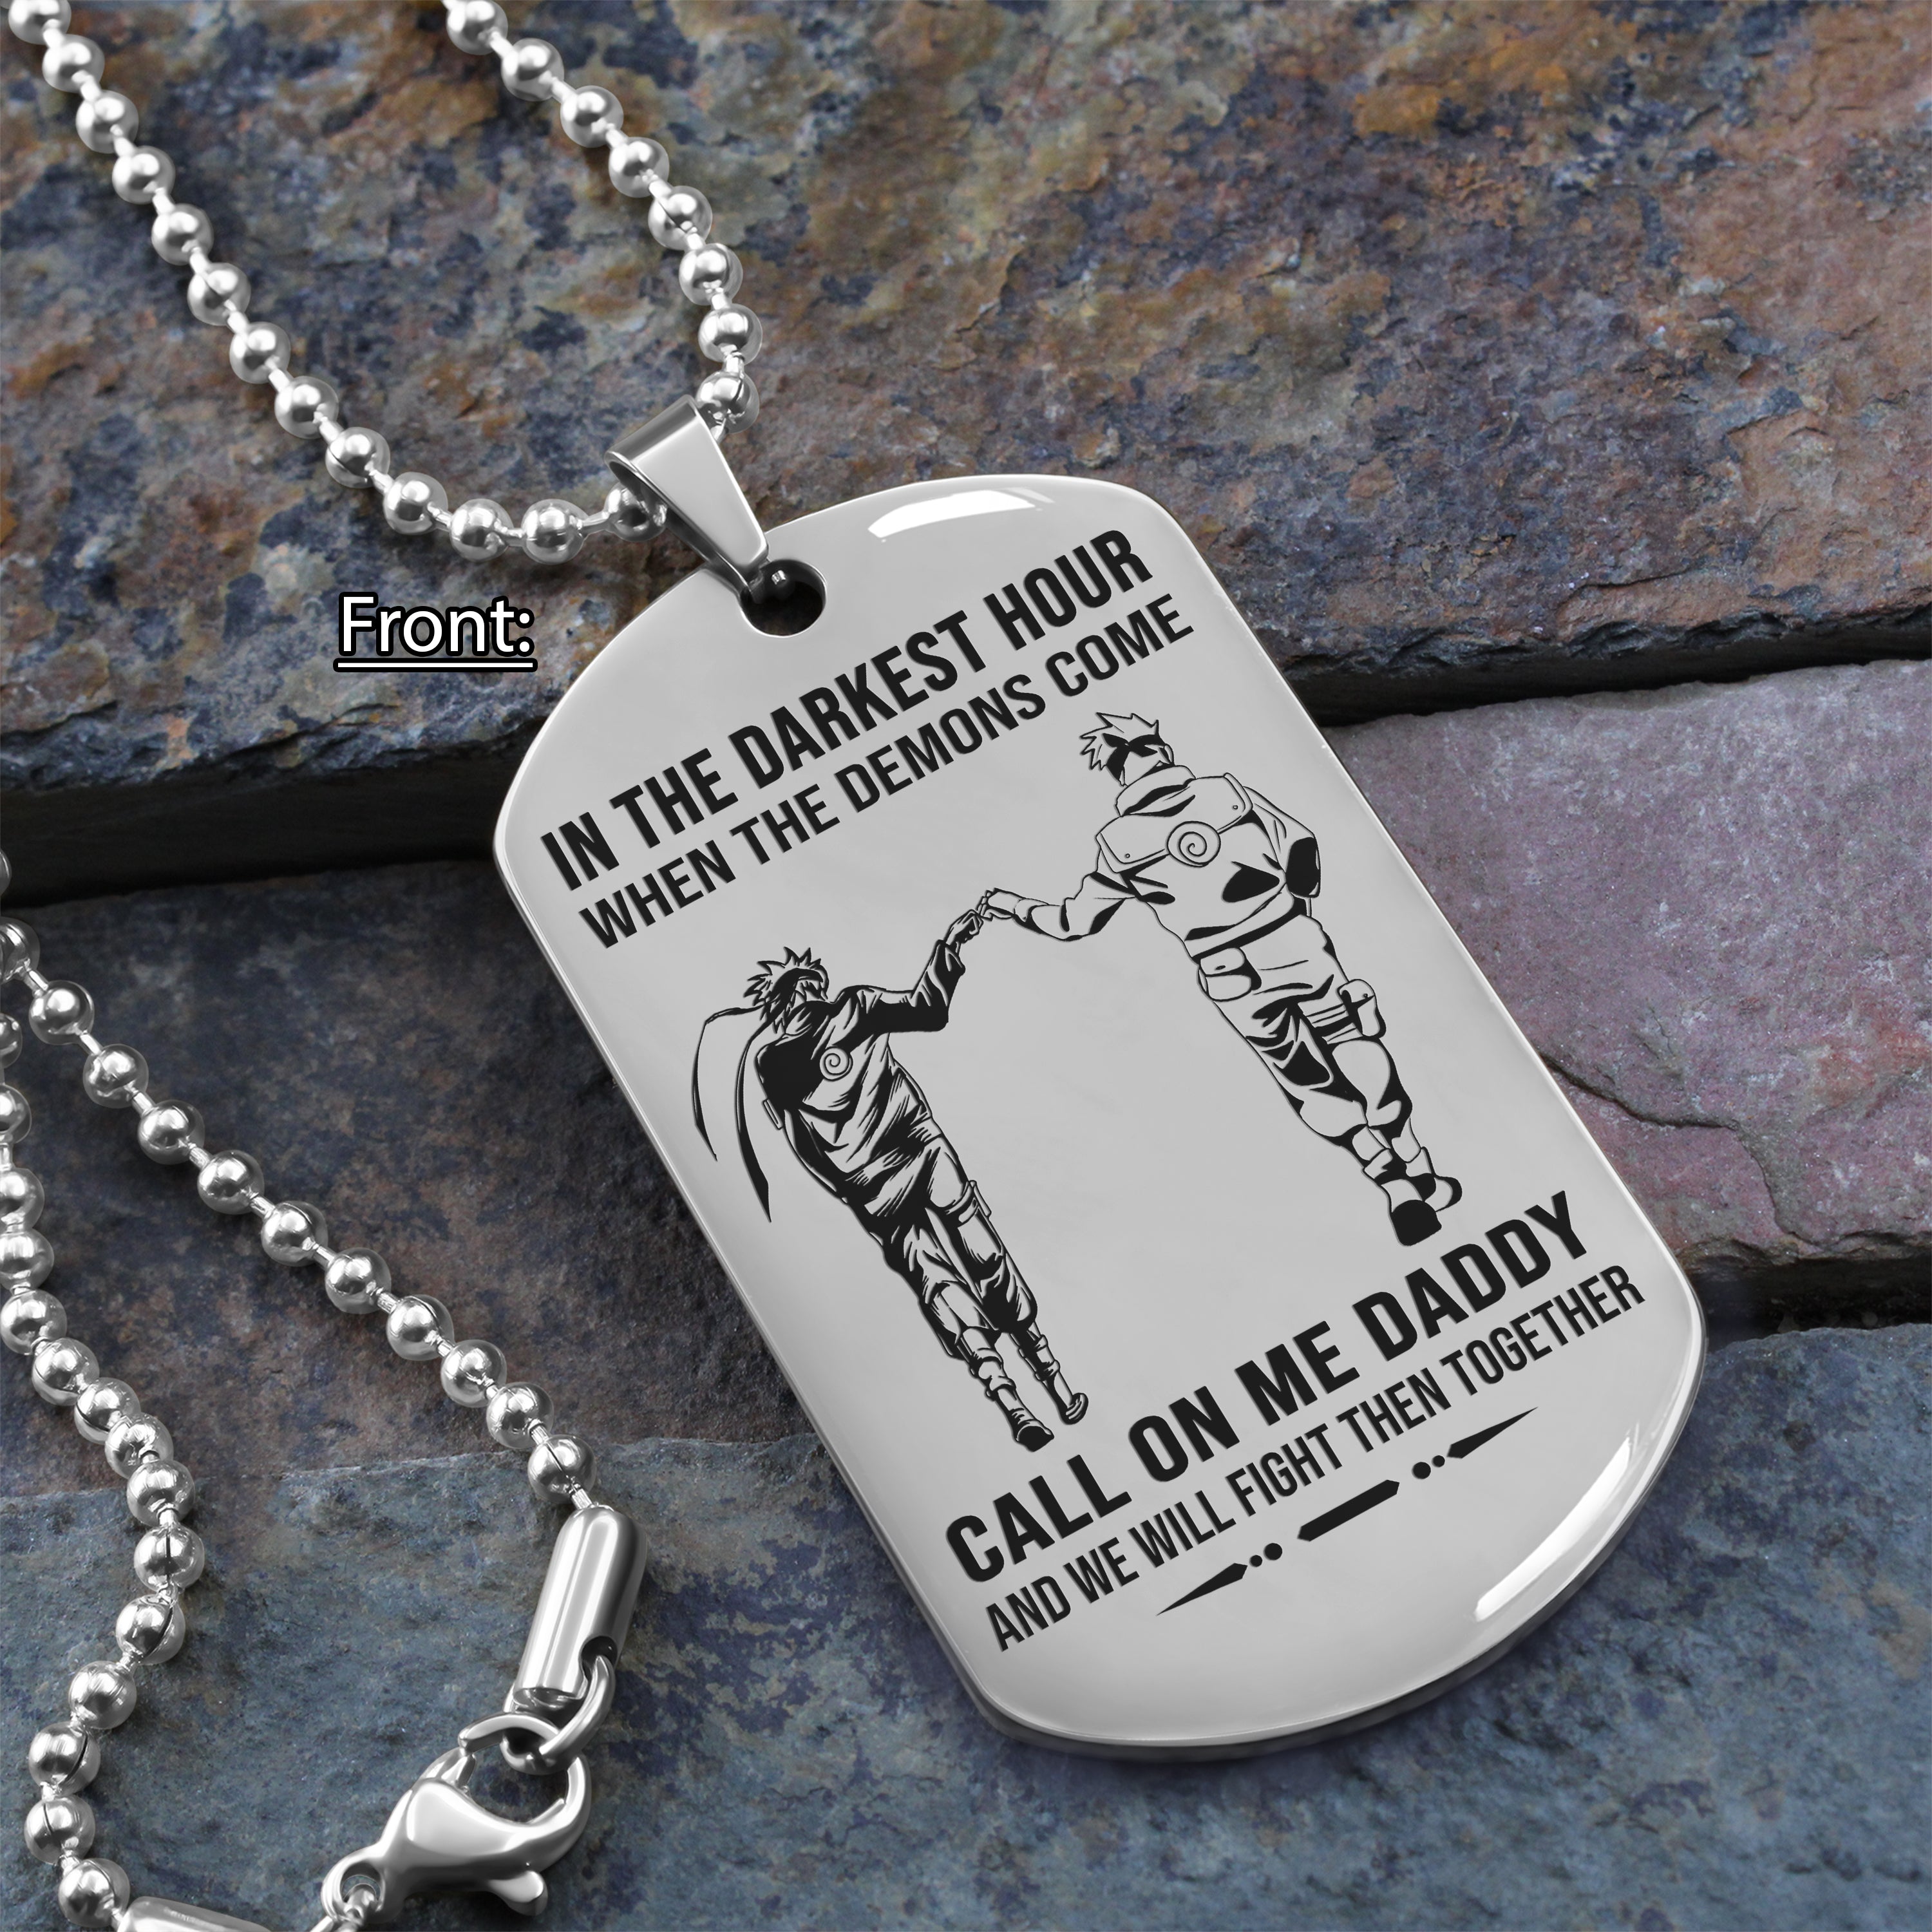 Customizable One Sided NRT Dog Tag Call On Me Daddy Call On Me Son And We Will Fight Them Together